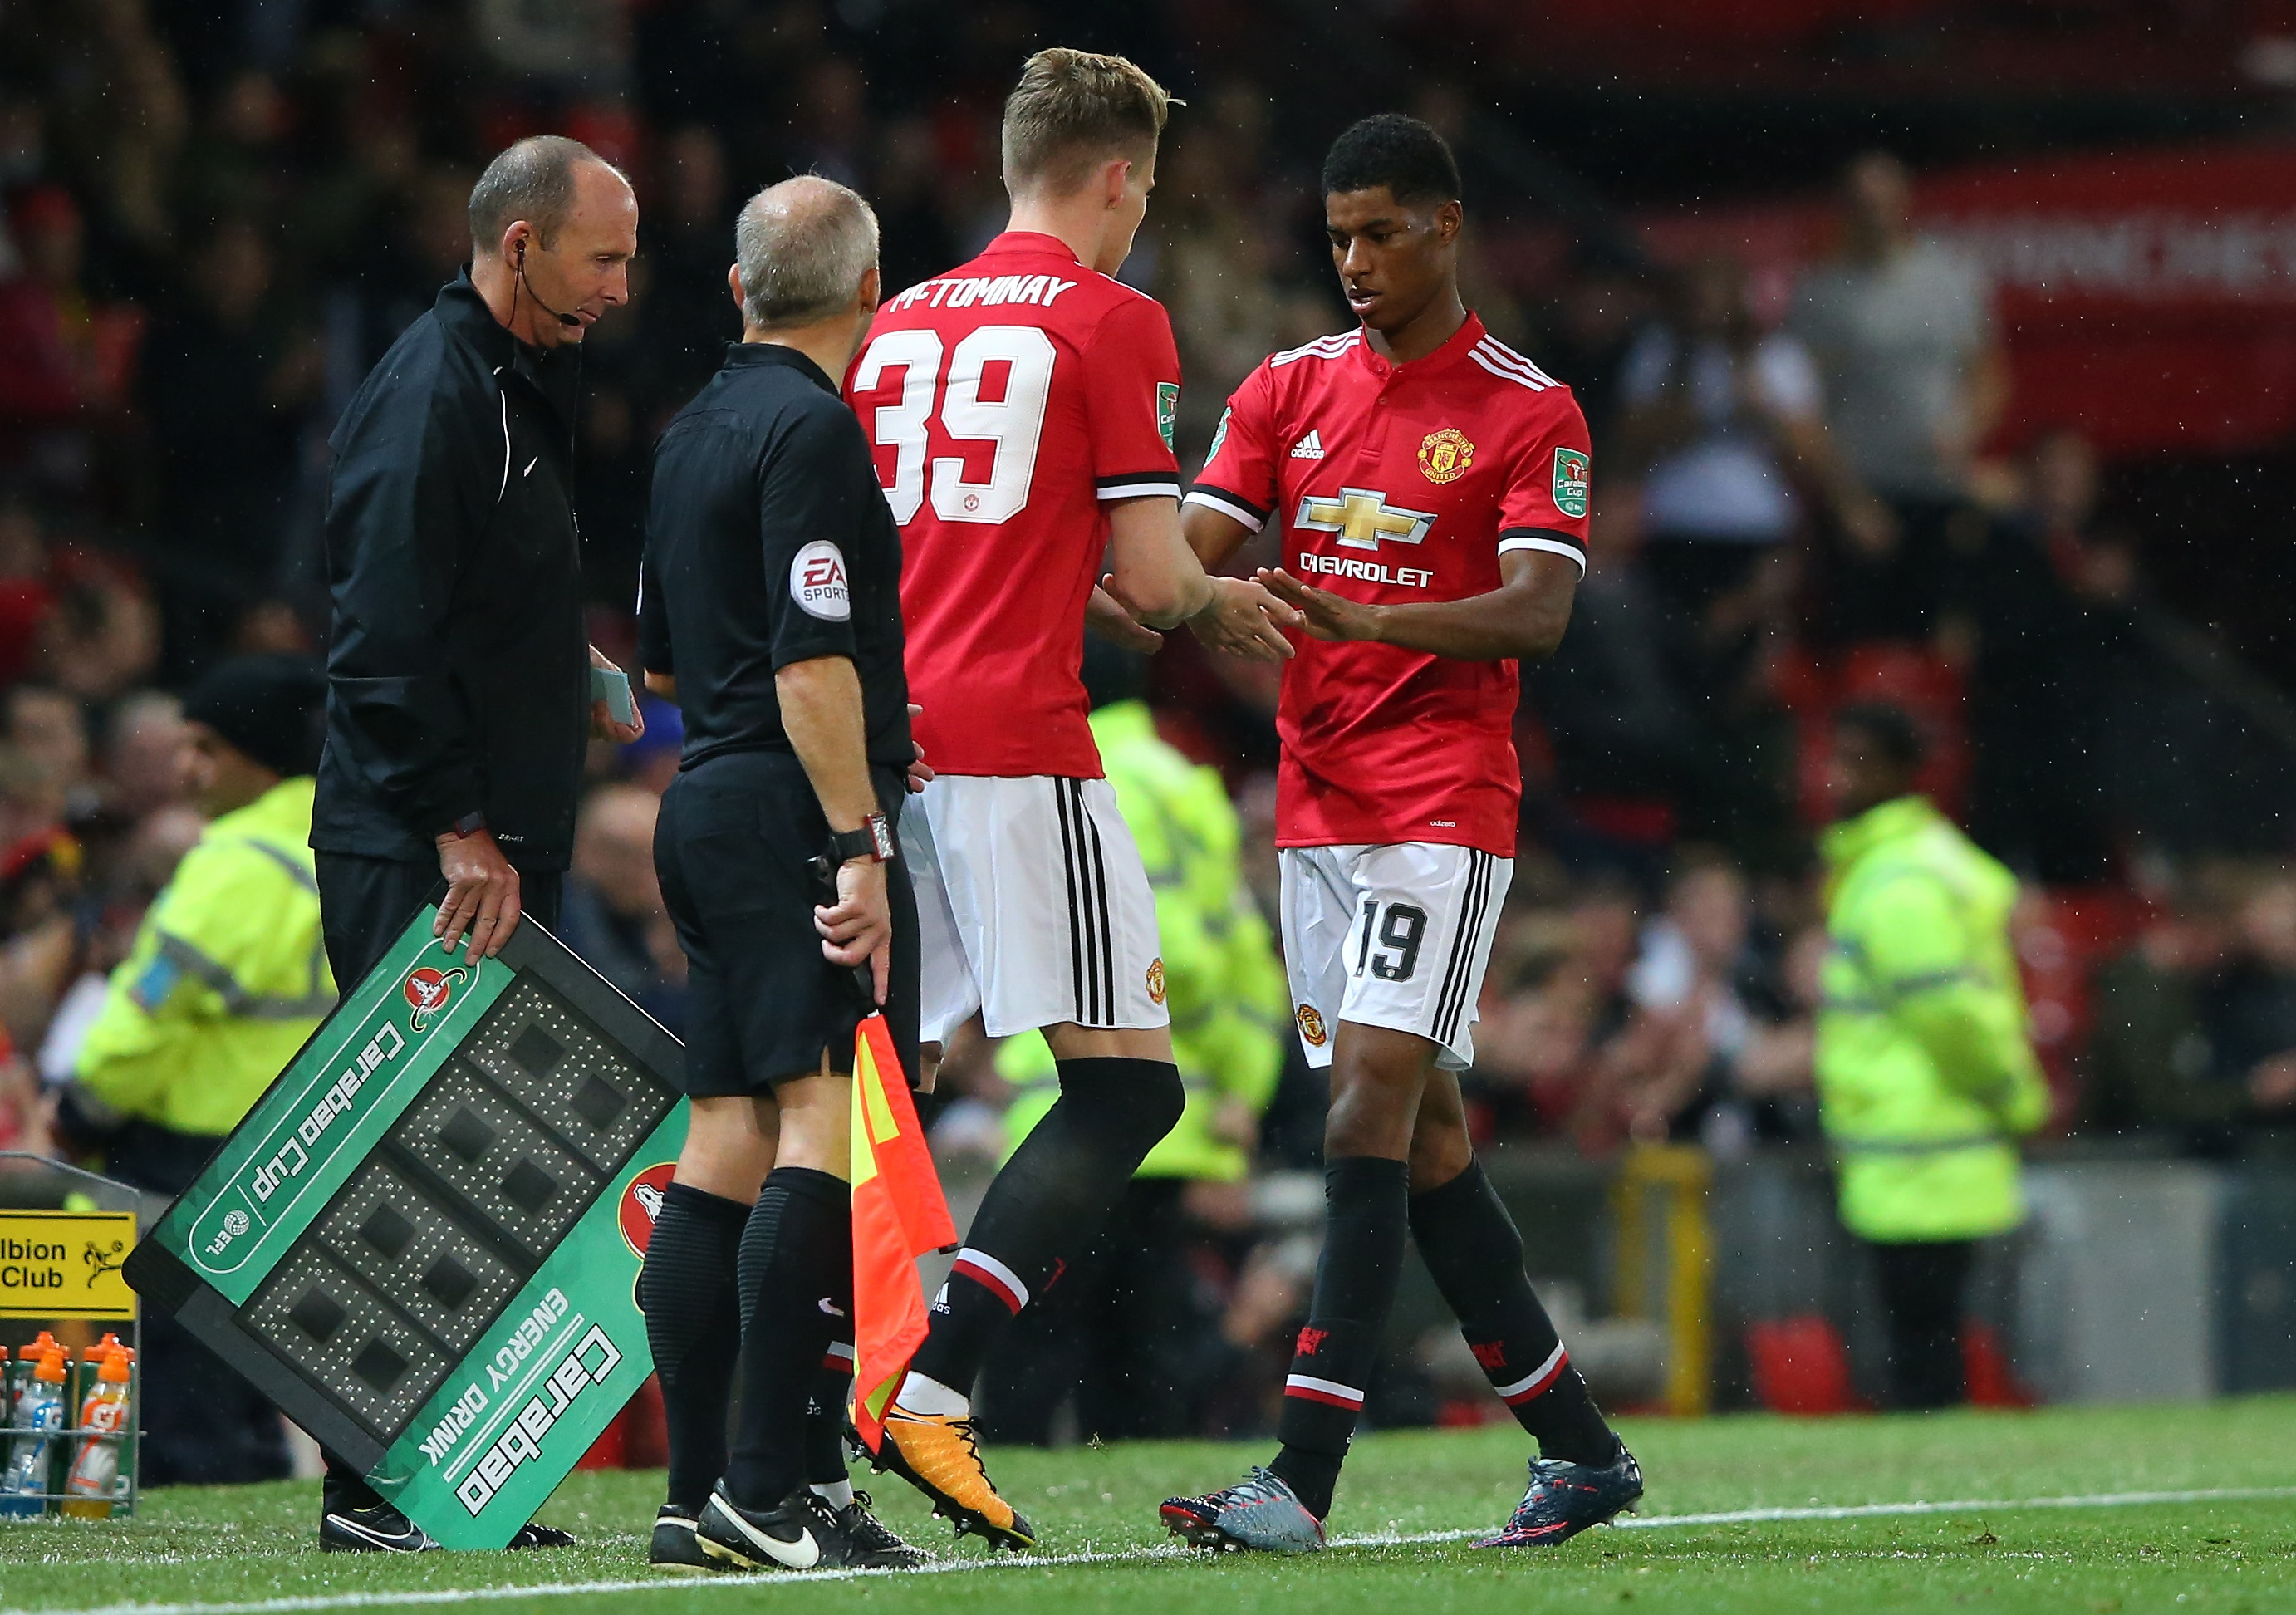 MANCHESTER, ENGLAND - SEPTEMBER 20: Scott McTominay of Manchester United comes on for Marcus Rashford of Manchester United during the Carabao Cup Third Round match between Manchester United and Burton Albion at Old Trafford on September 20, 2017 in Manchester, England.  (Photo by Alex Livesey/Getty Images)